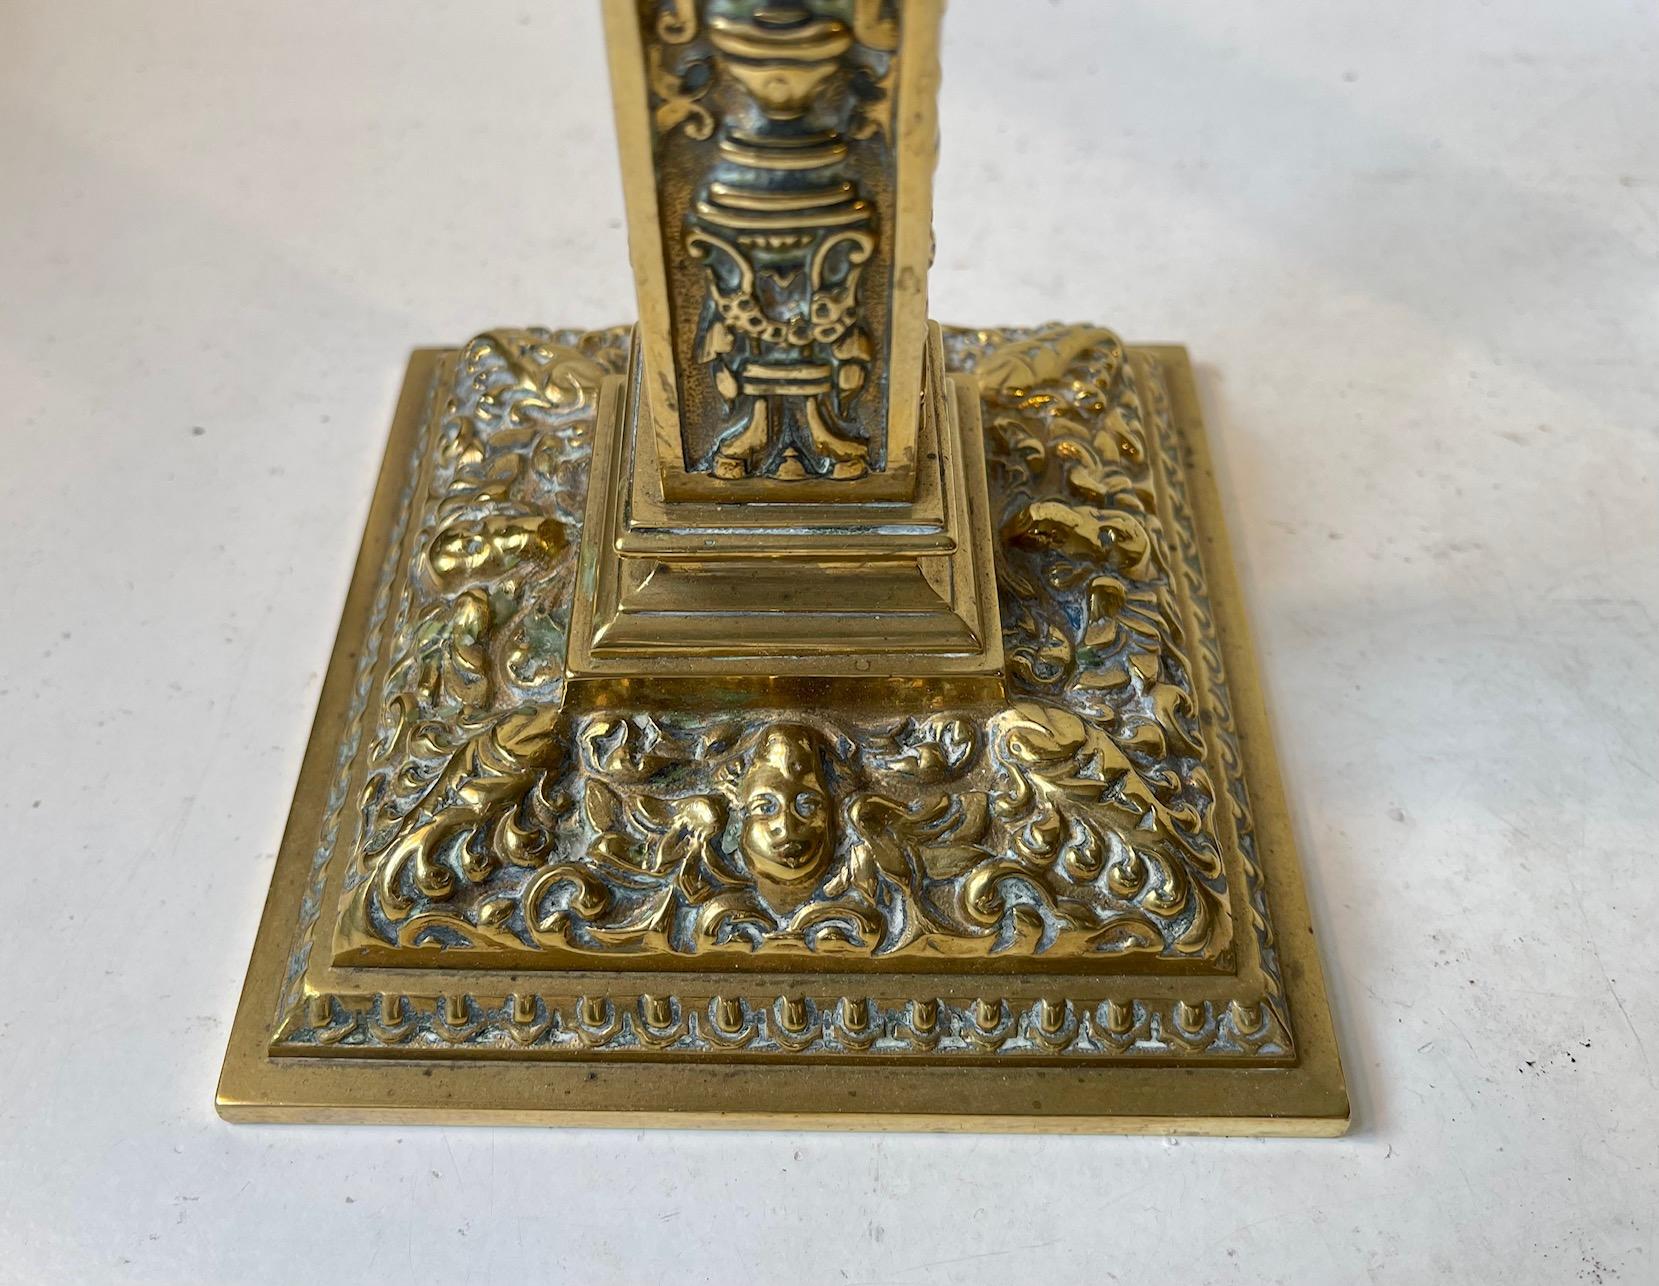 Antique English Gilt Ormulo Bronze Candlesticks by Samuel Clark, 19th cen. In Good Condition For Sale In Esbjerg, DK